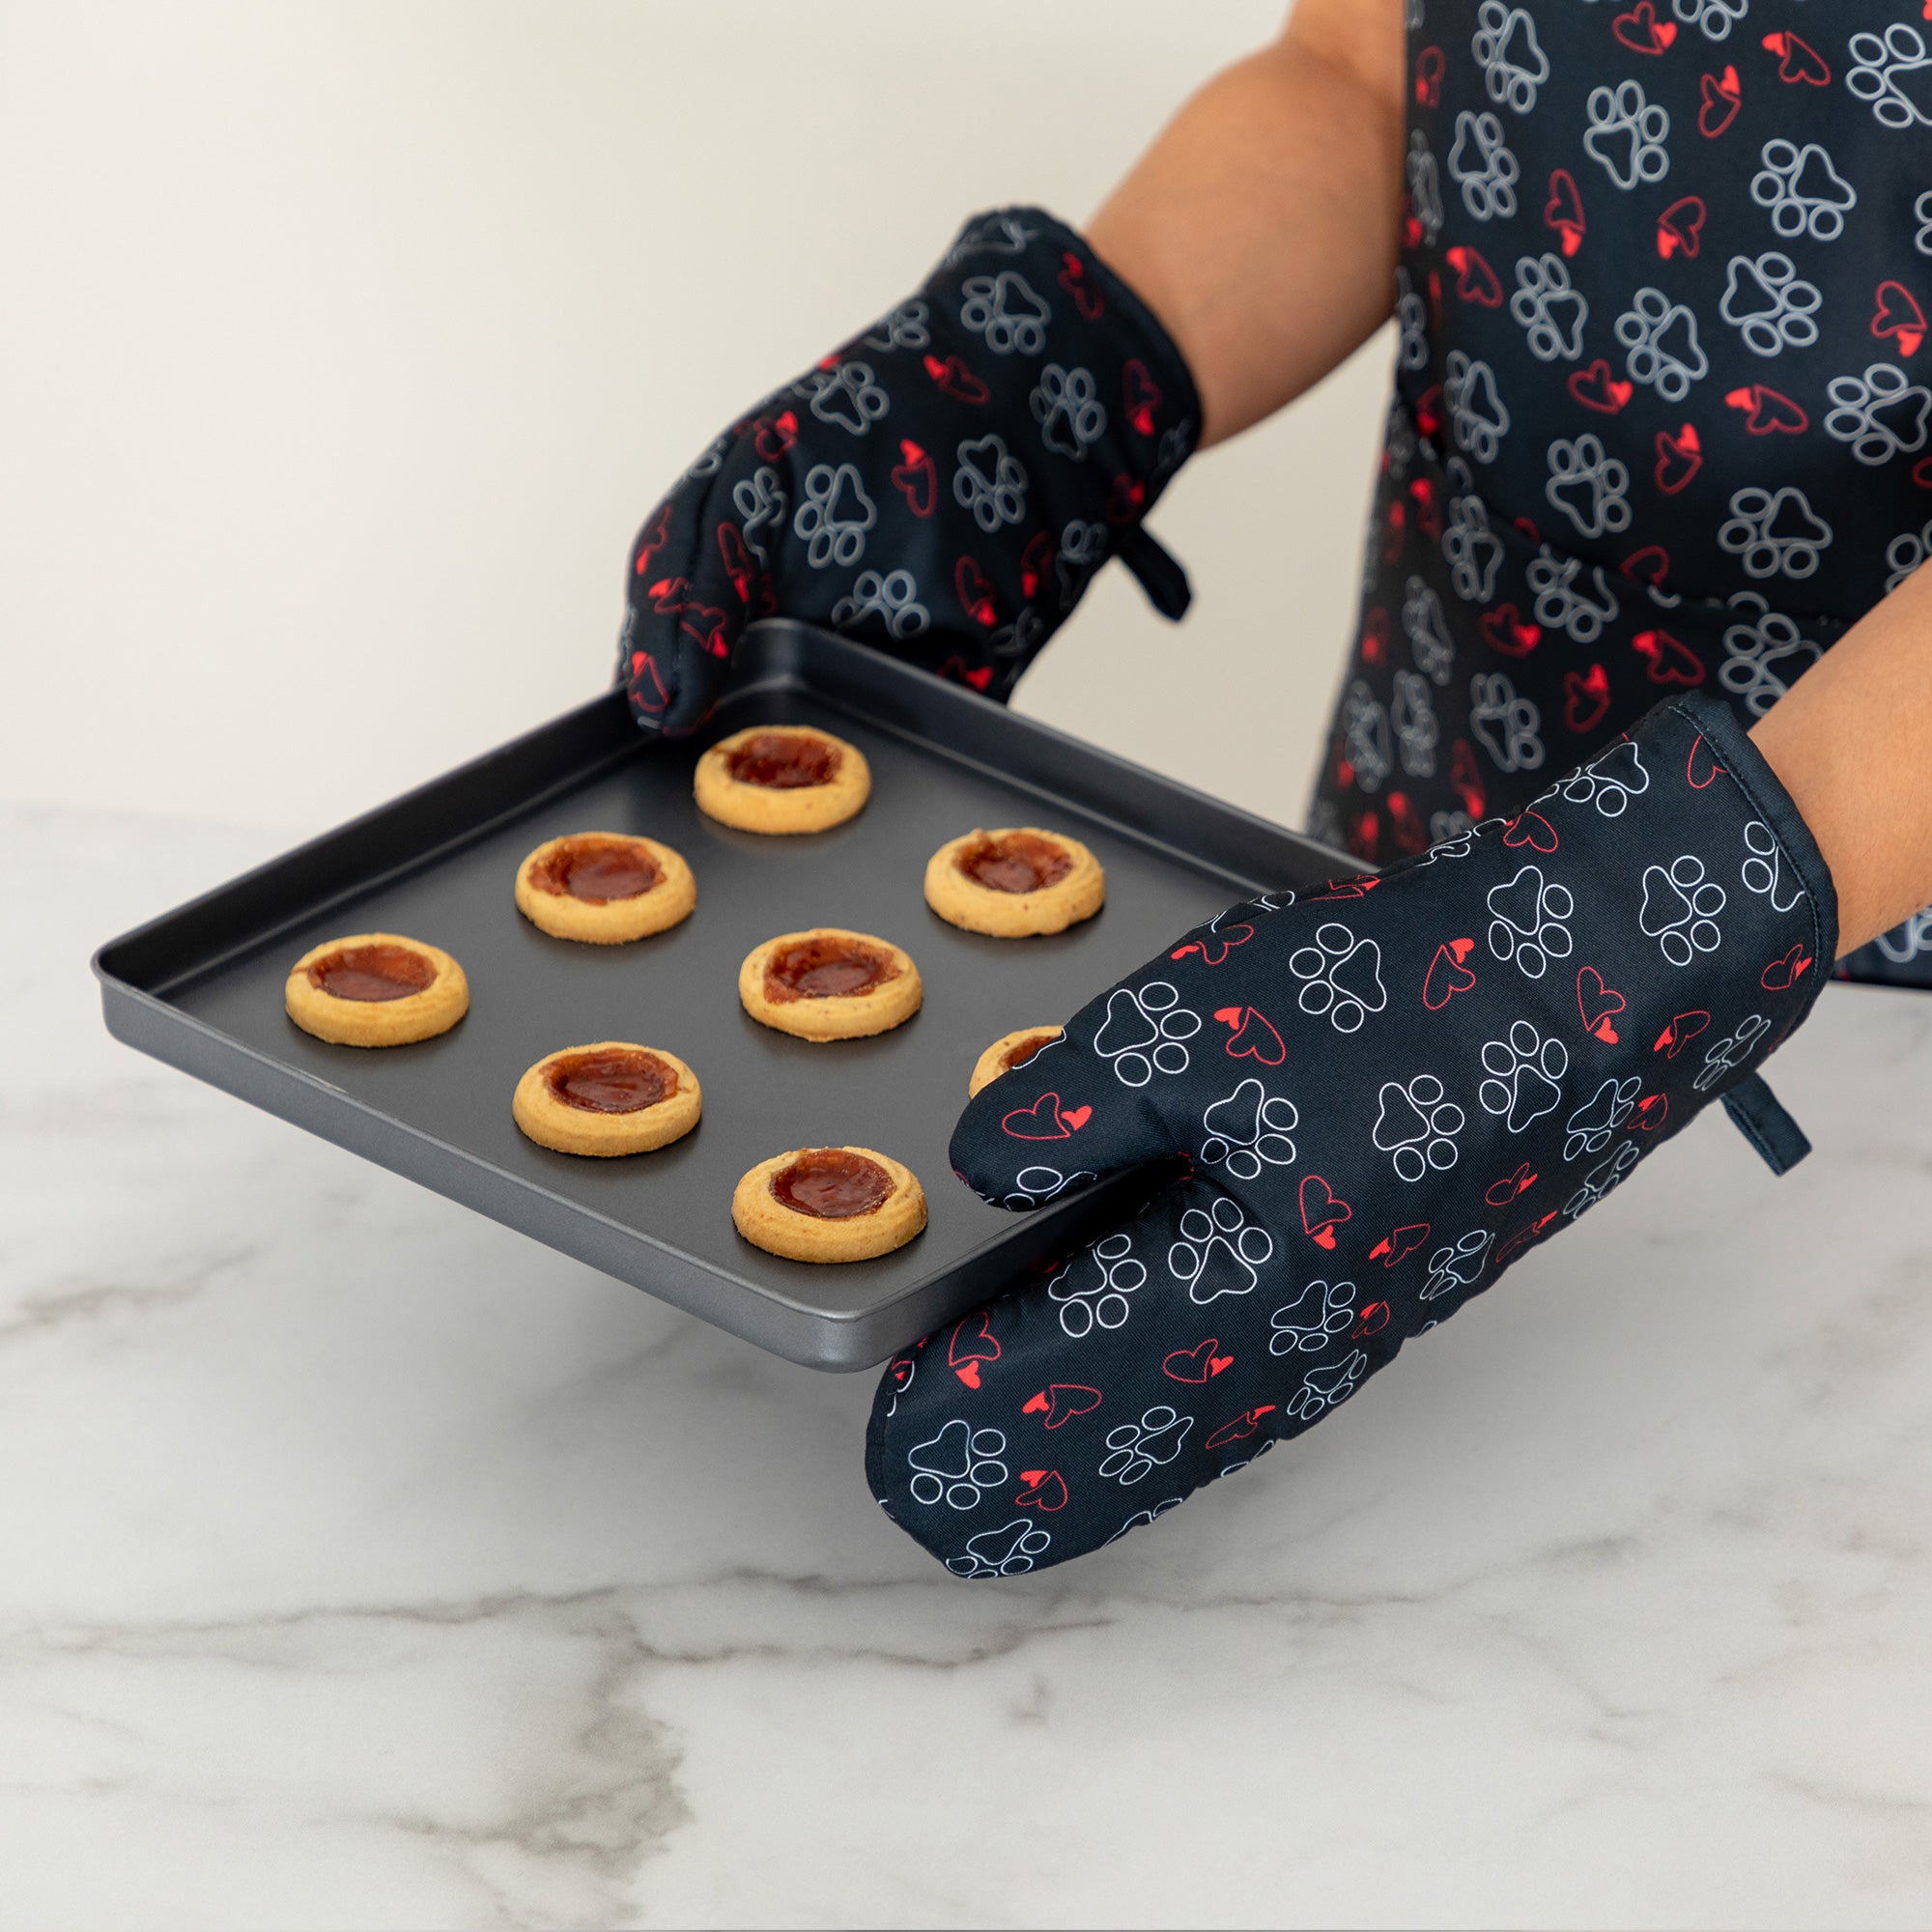 Outlined Paws & Hearts Kitchen Textiles - Oven Mitt Set